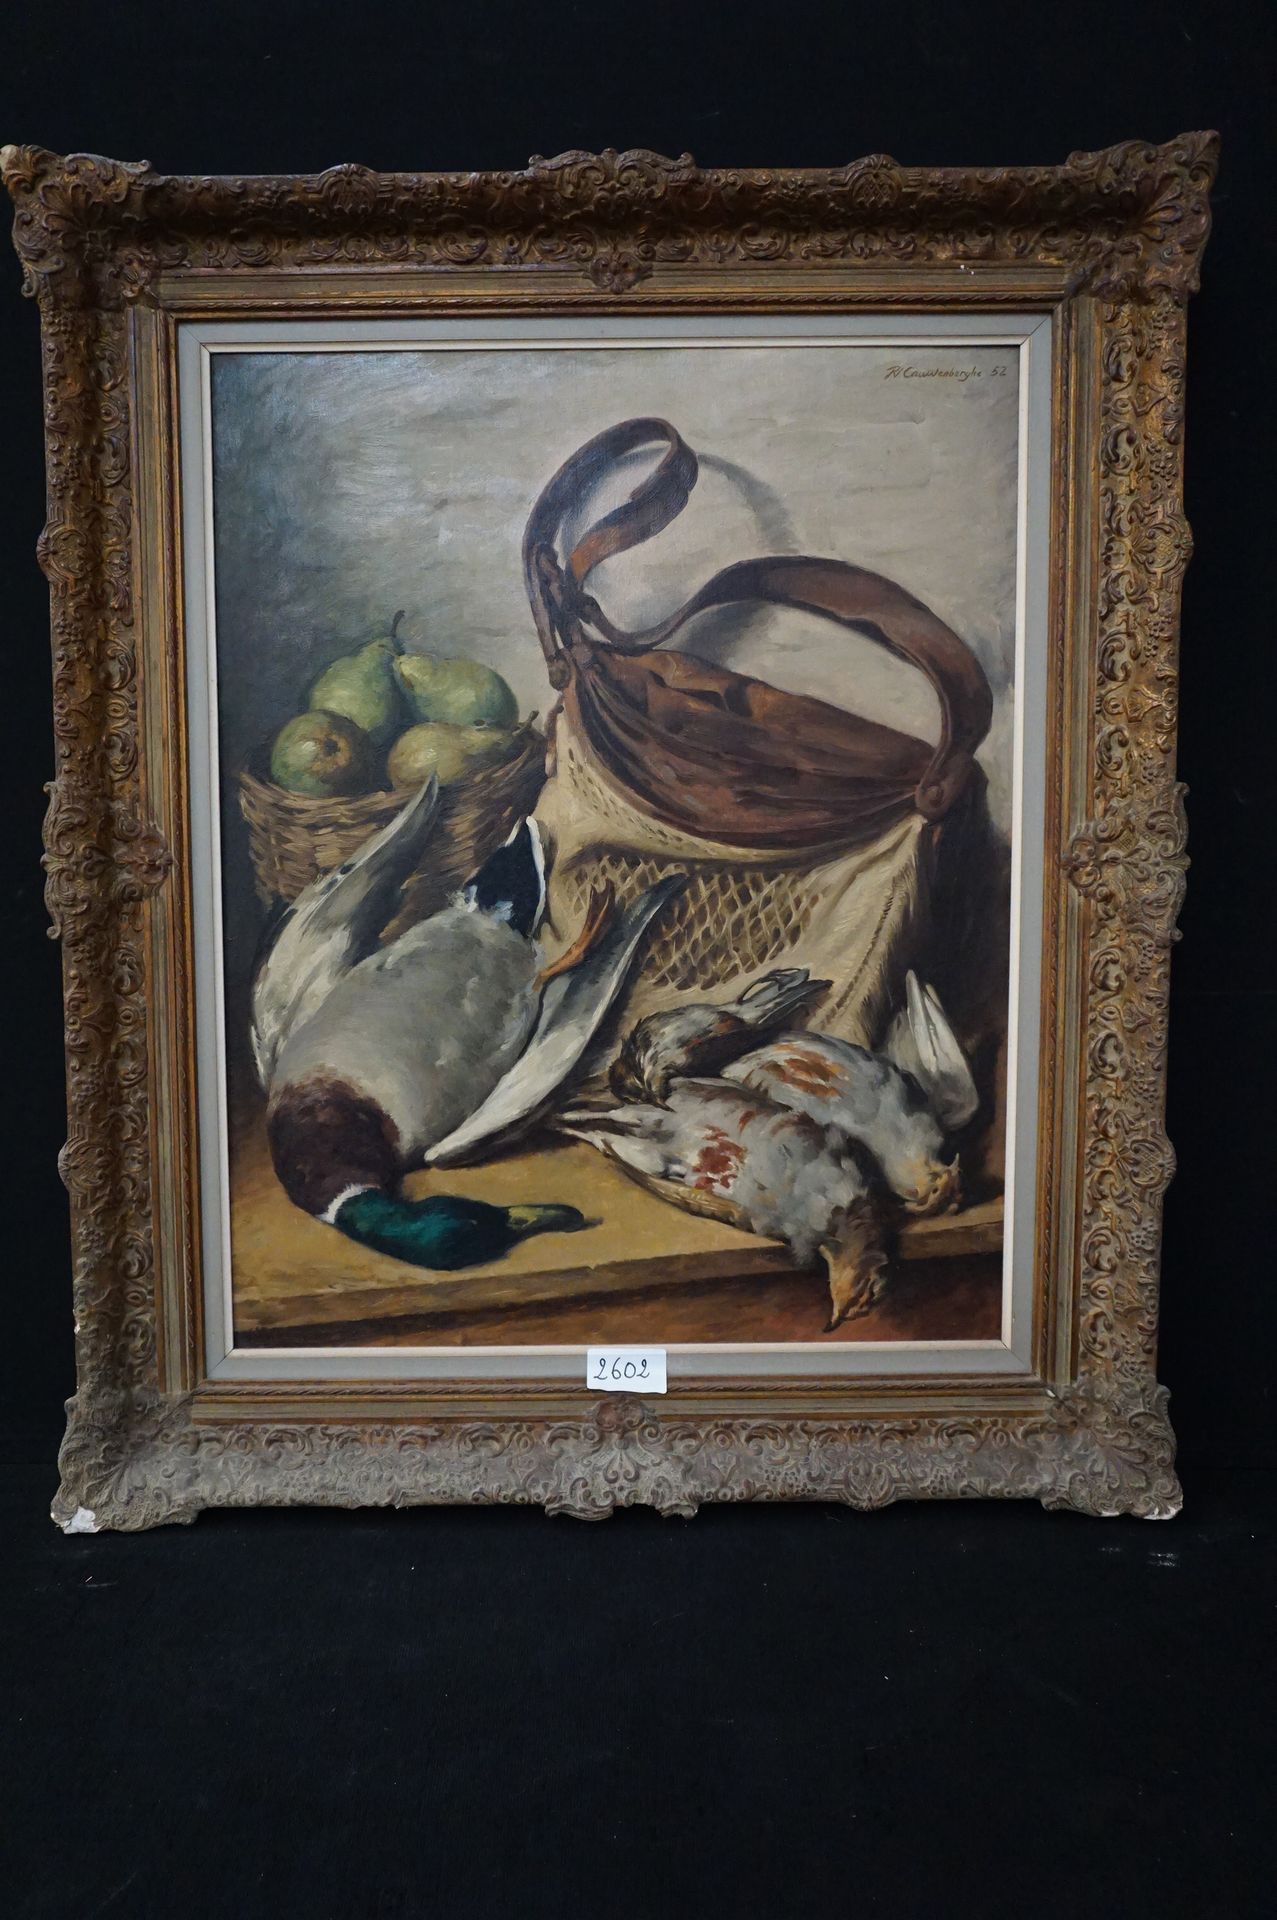 ROBERT CAUWENBERGHE (1905 - 1985) "Hunting Still Life" - Oil on canvas - Signed &hellip;